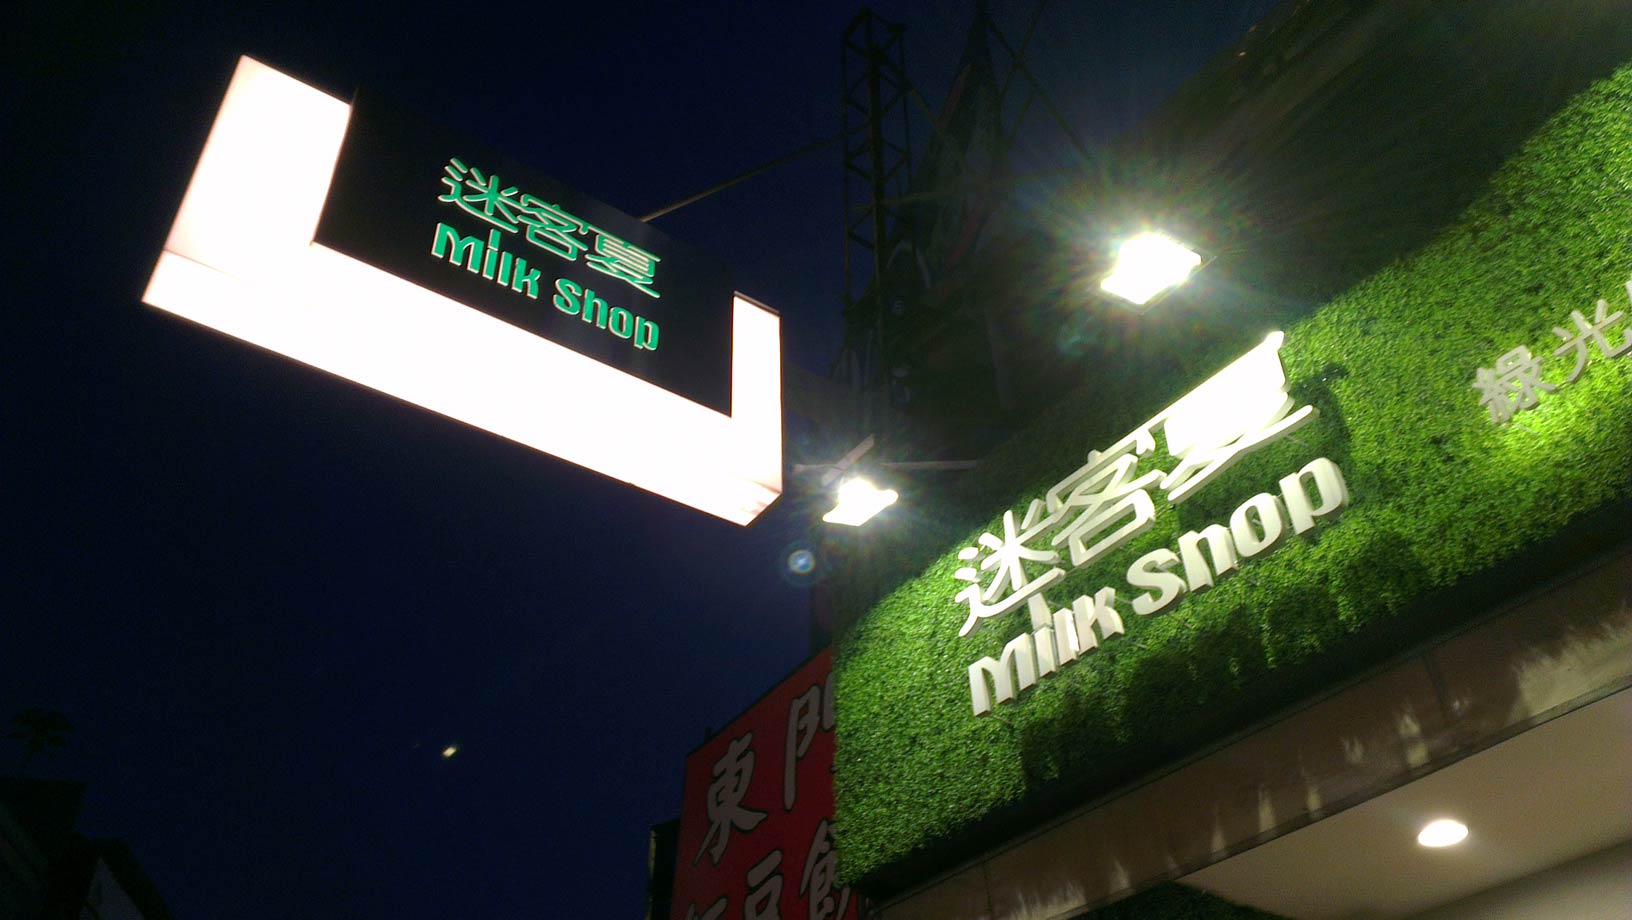 sign for a drinks store, labeled 'milk shop' in English and 'mi ke xia' in Chinese characters